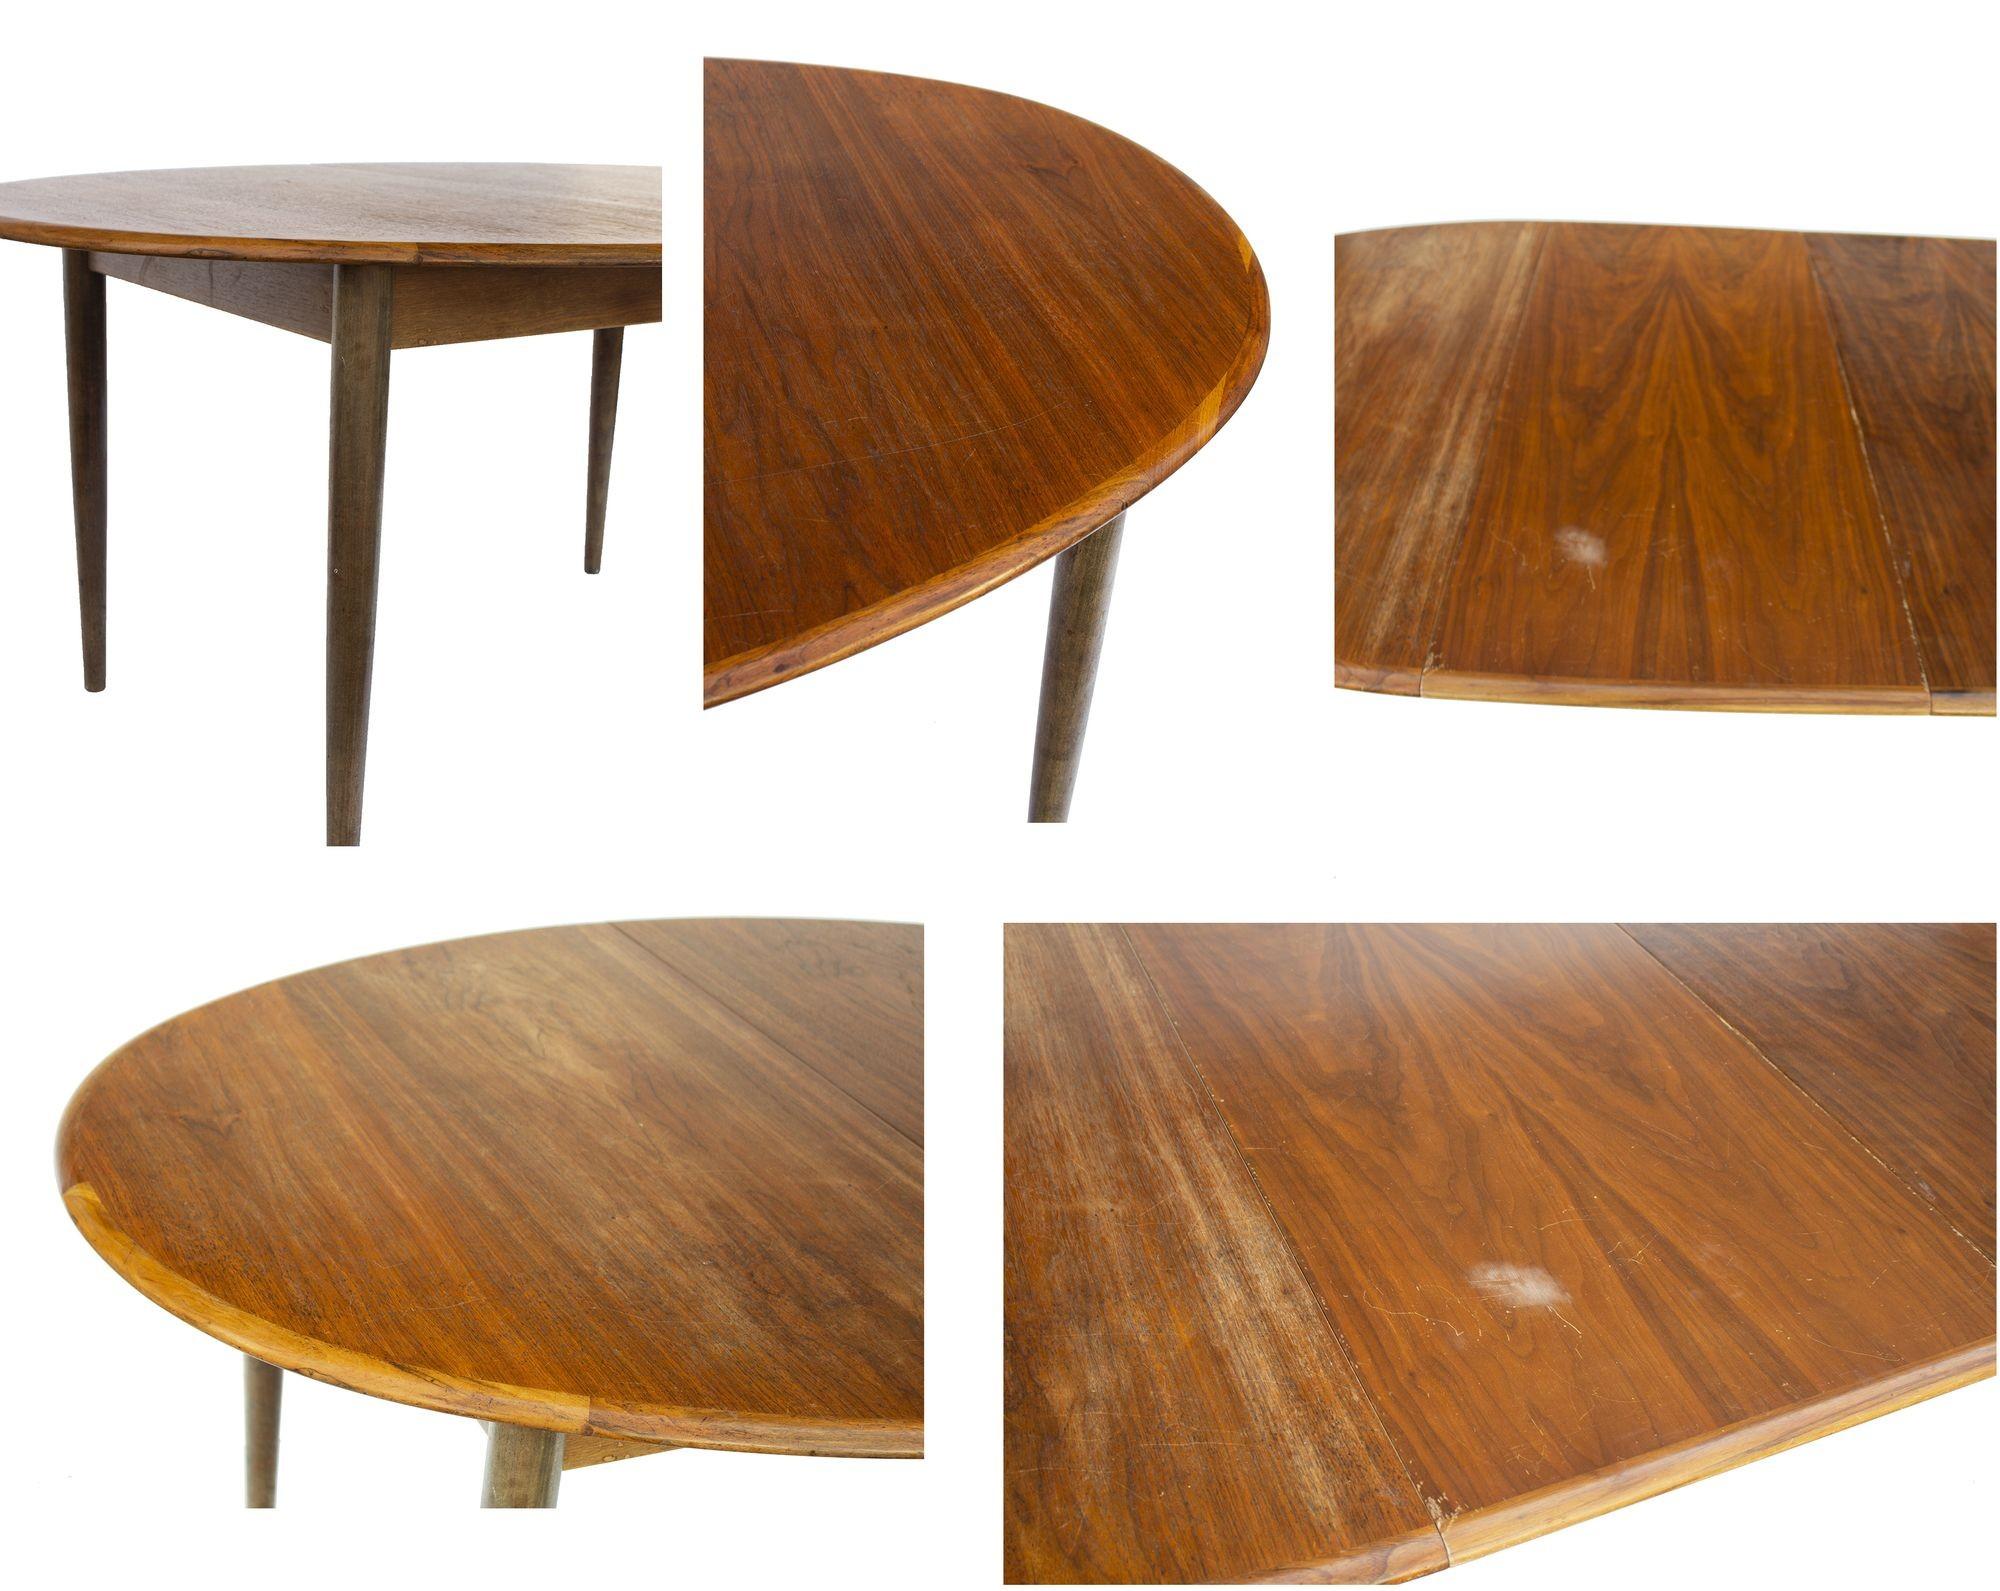 Oval Danish Teak Dining Table with 2 Leaves by Gudme Mobelfabrik 8